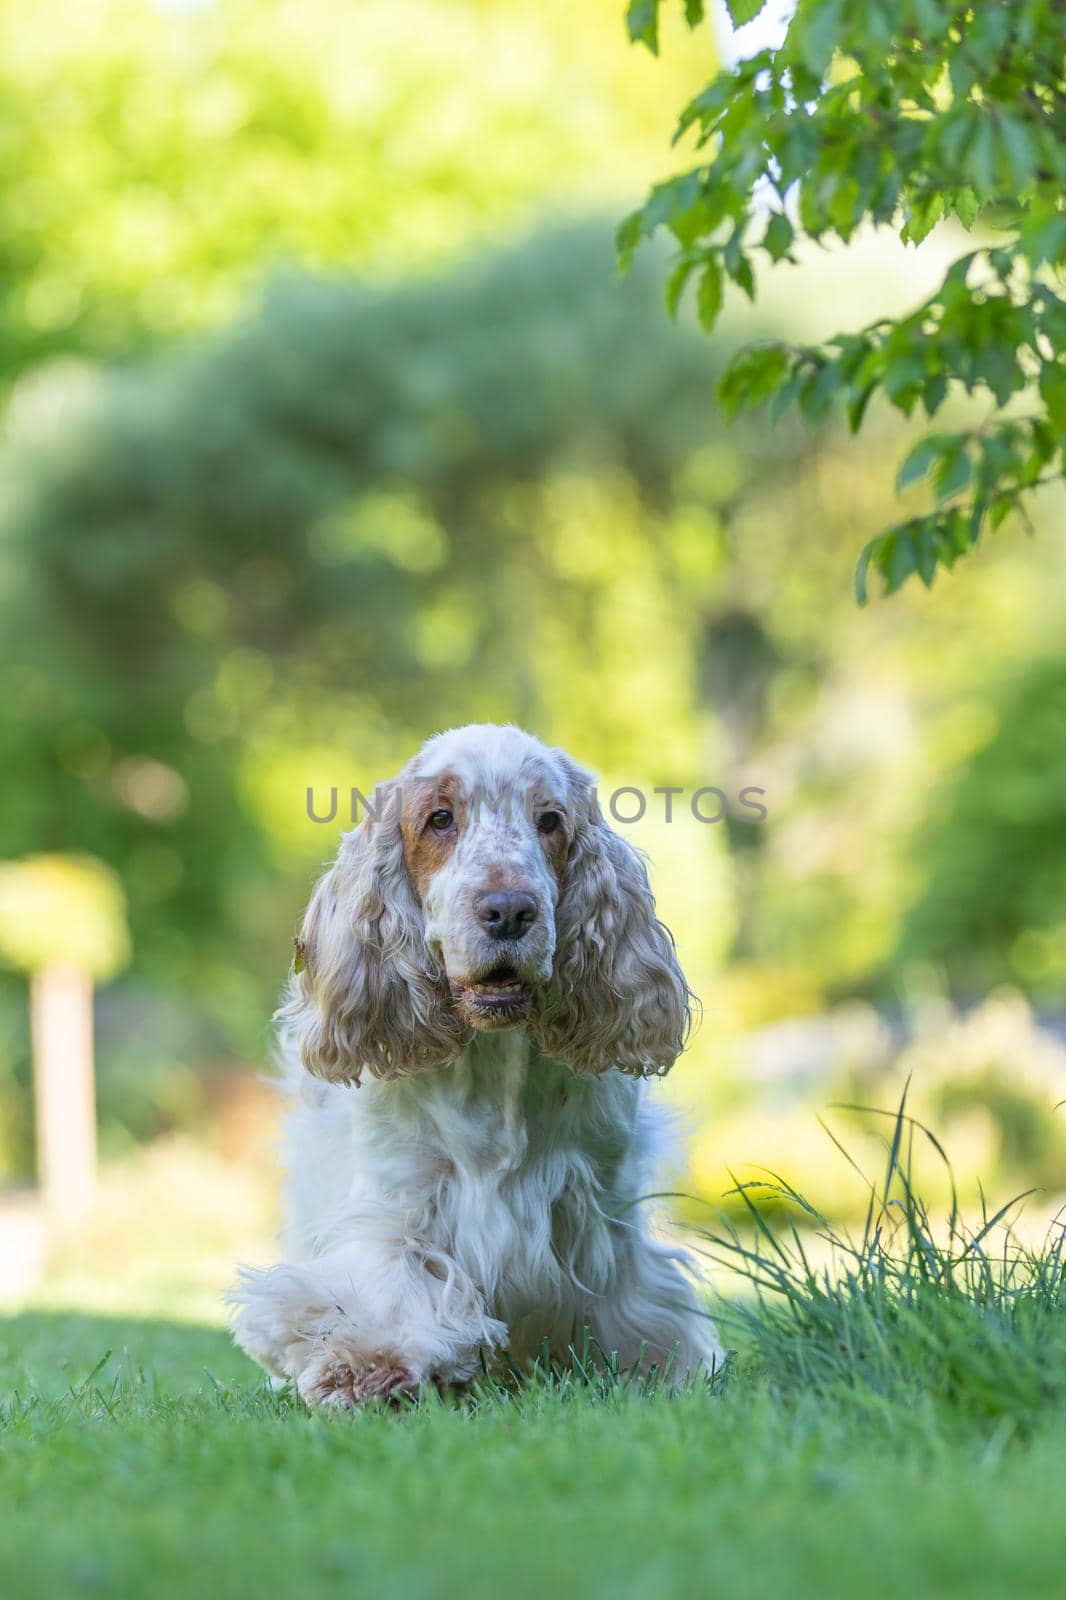 purebred Spaniel Dog Breed Is In The Grass on summer garden with afternoon sun